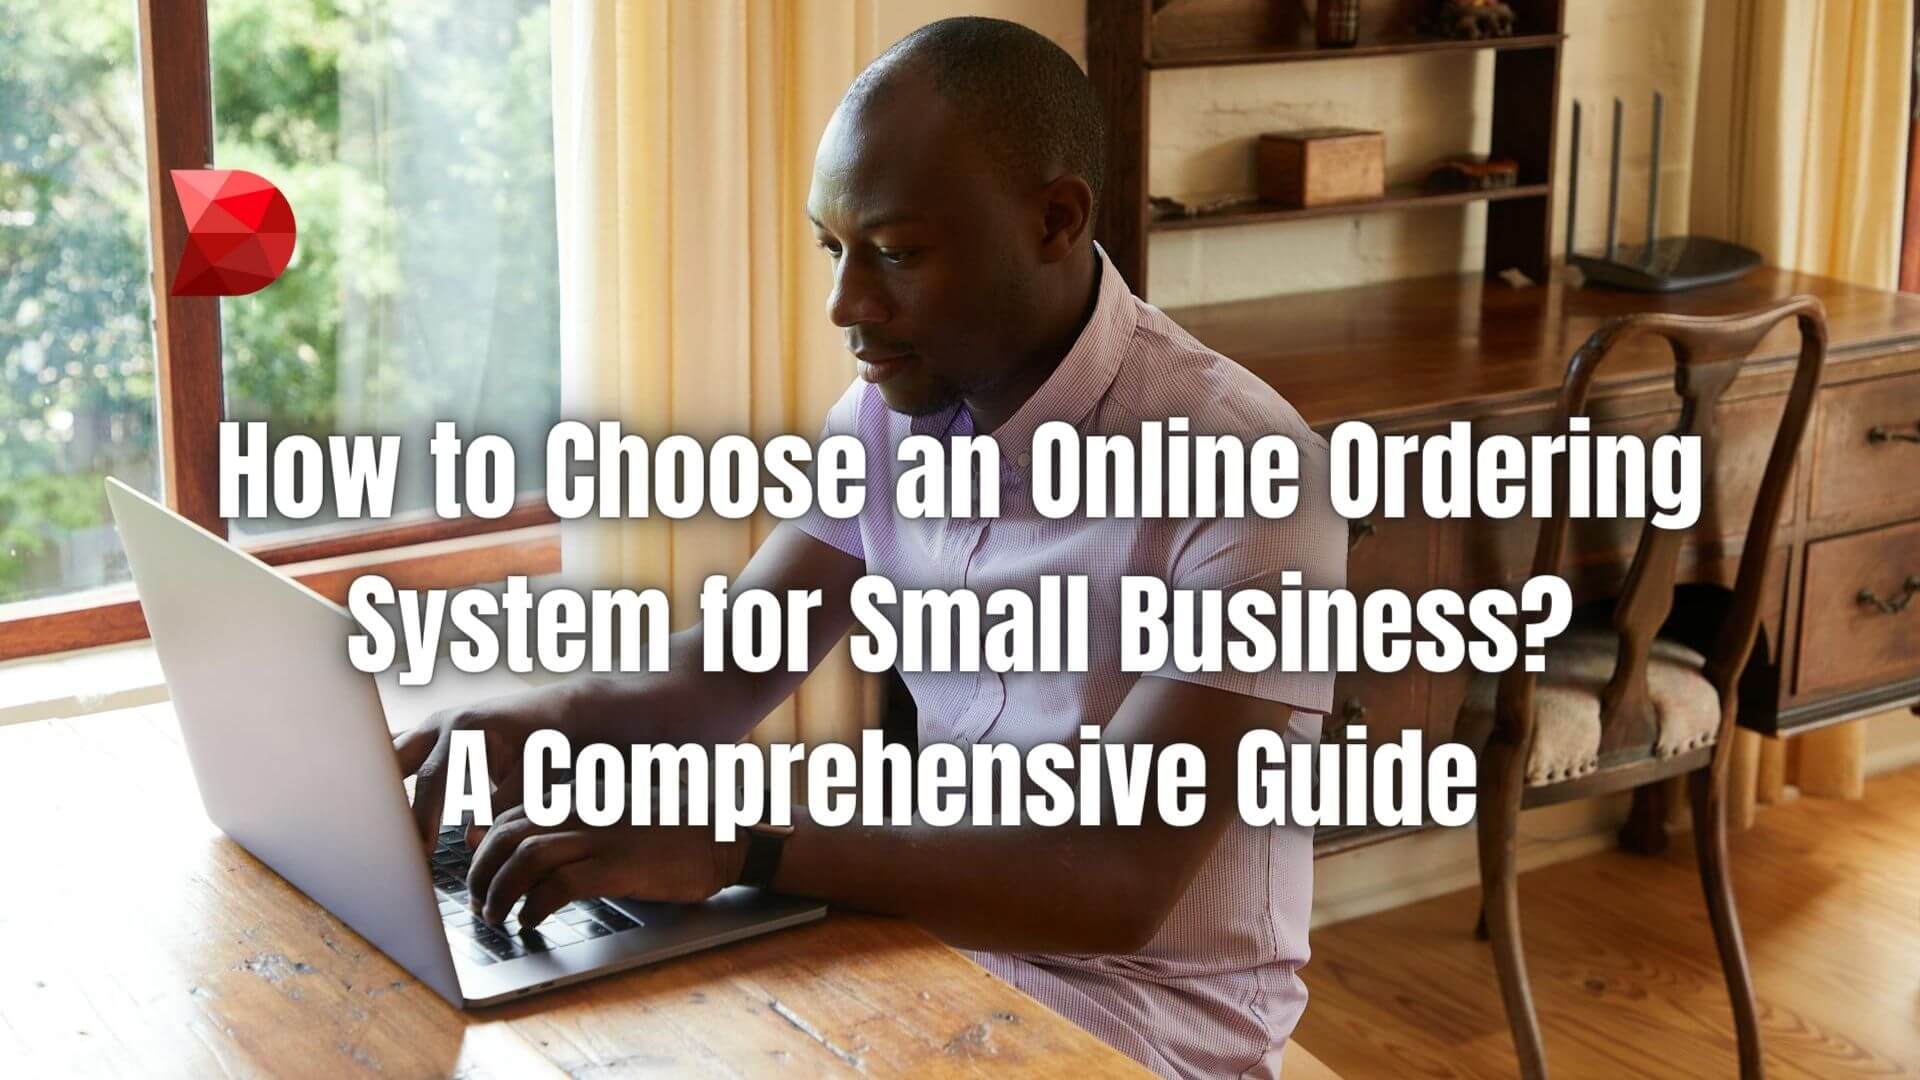 Find the perfect online ordering system for your small business. Learn how to navigate the options effectively in our comprehensive guide.